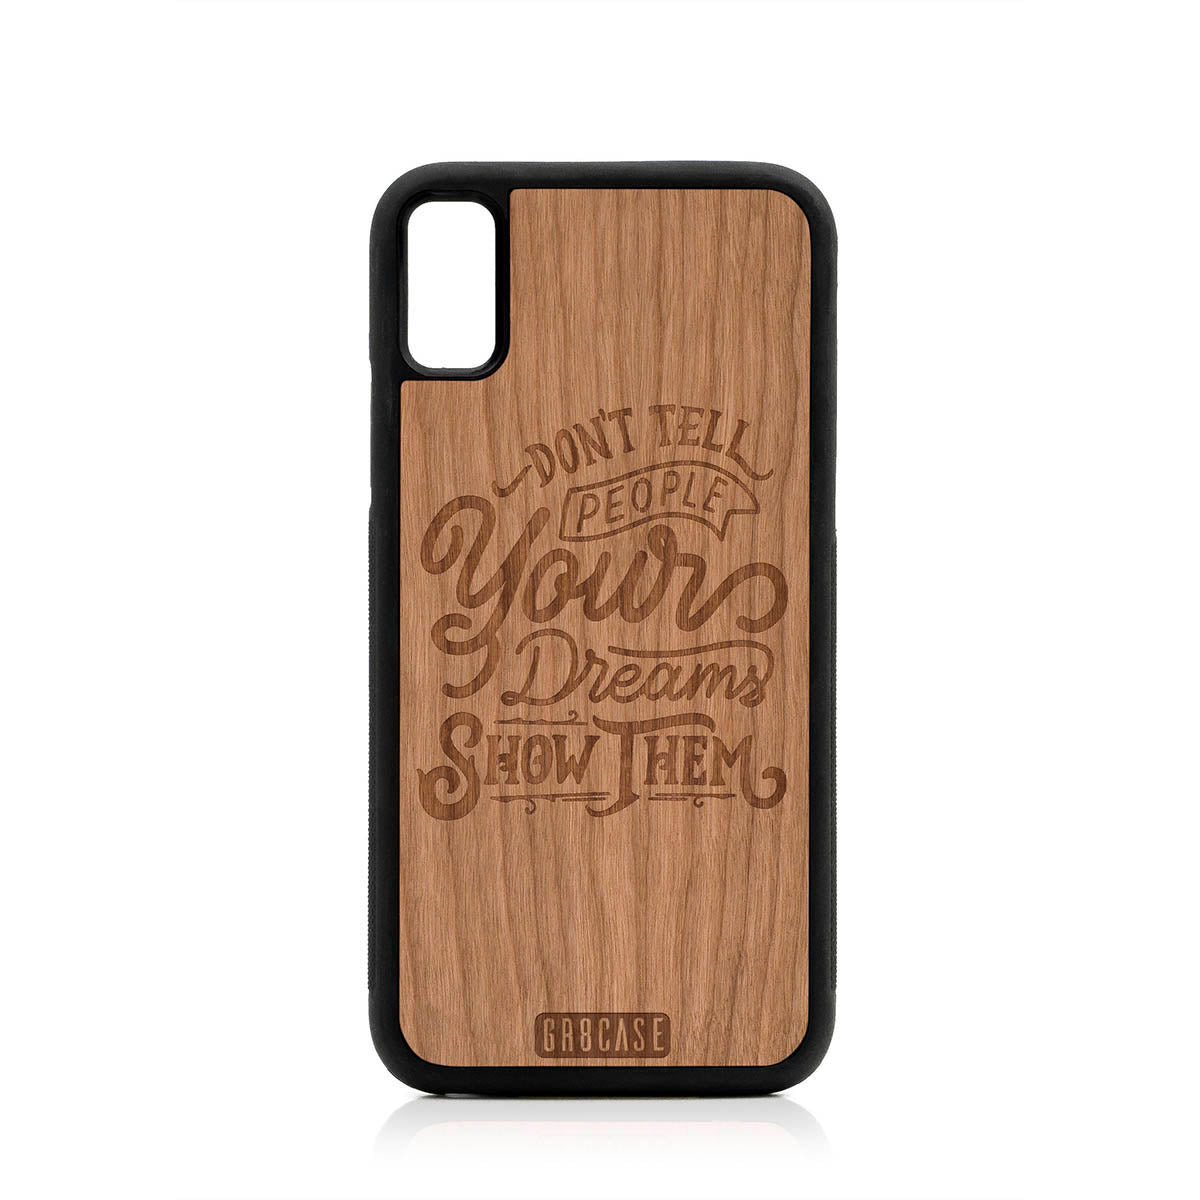 Don't Tell People Your Dreams Show Them Design Wood Case For iPhone X/XS by GR8CASE